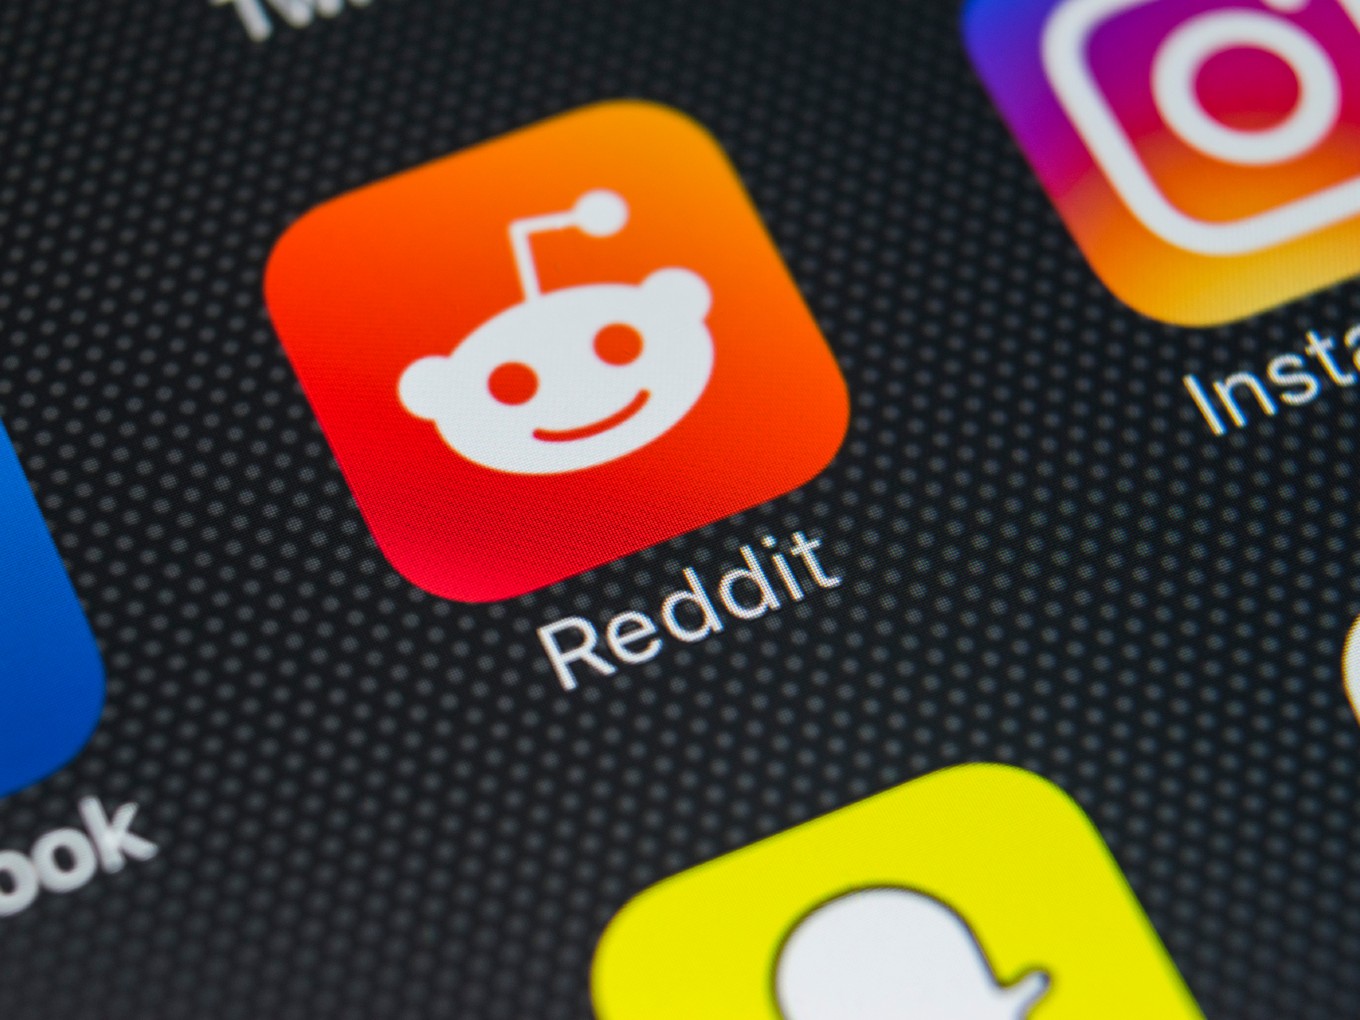 Product Stories: Reddit And The Story Of Zero Users In Its First Month 